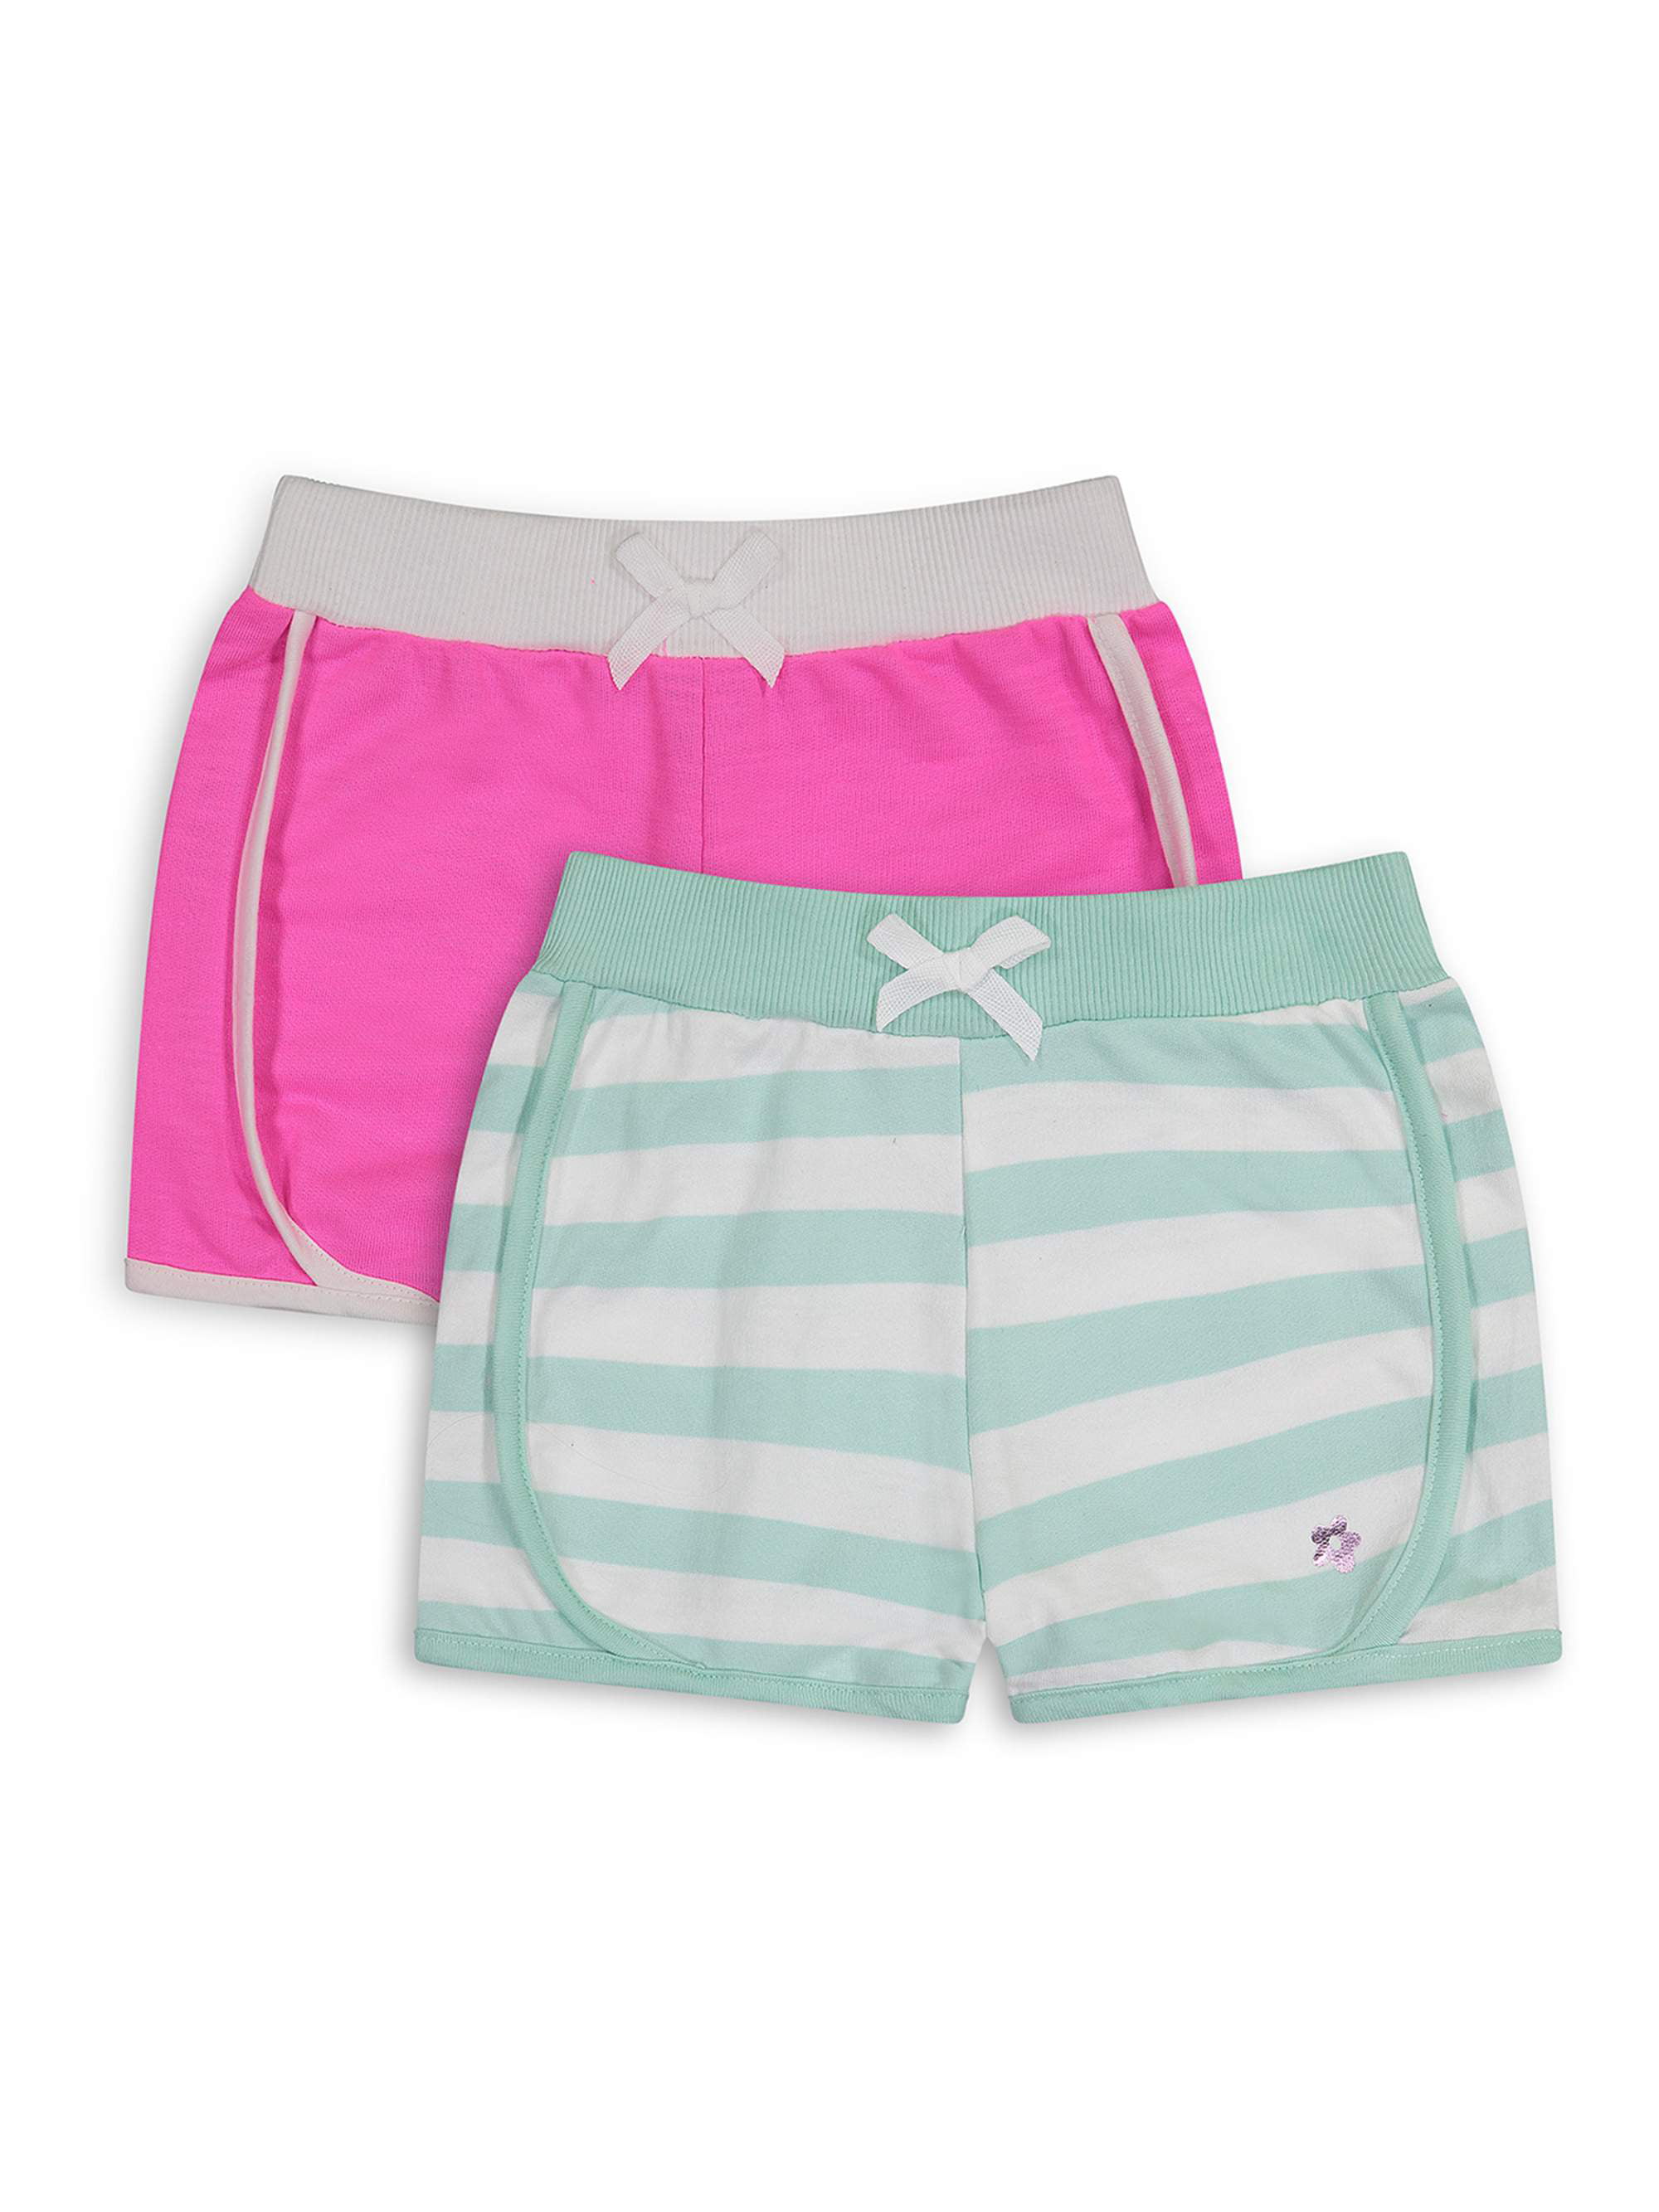 Justice Active Girls' Size 8 Orange Dolphin Shorts "WICKING" and "QUICK DRY" 